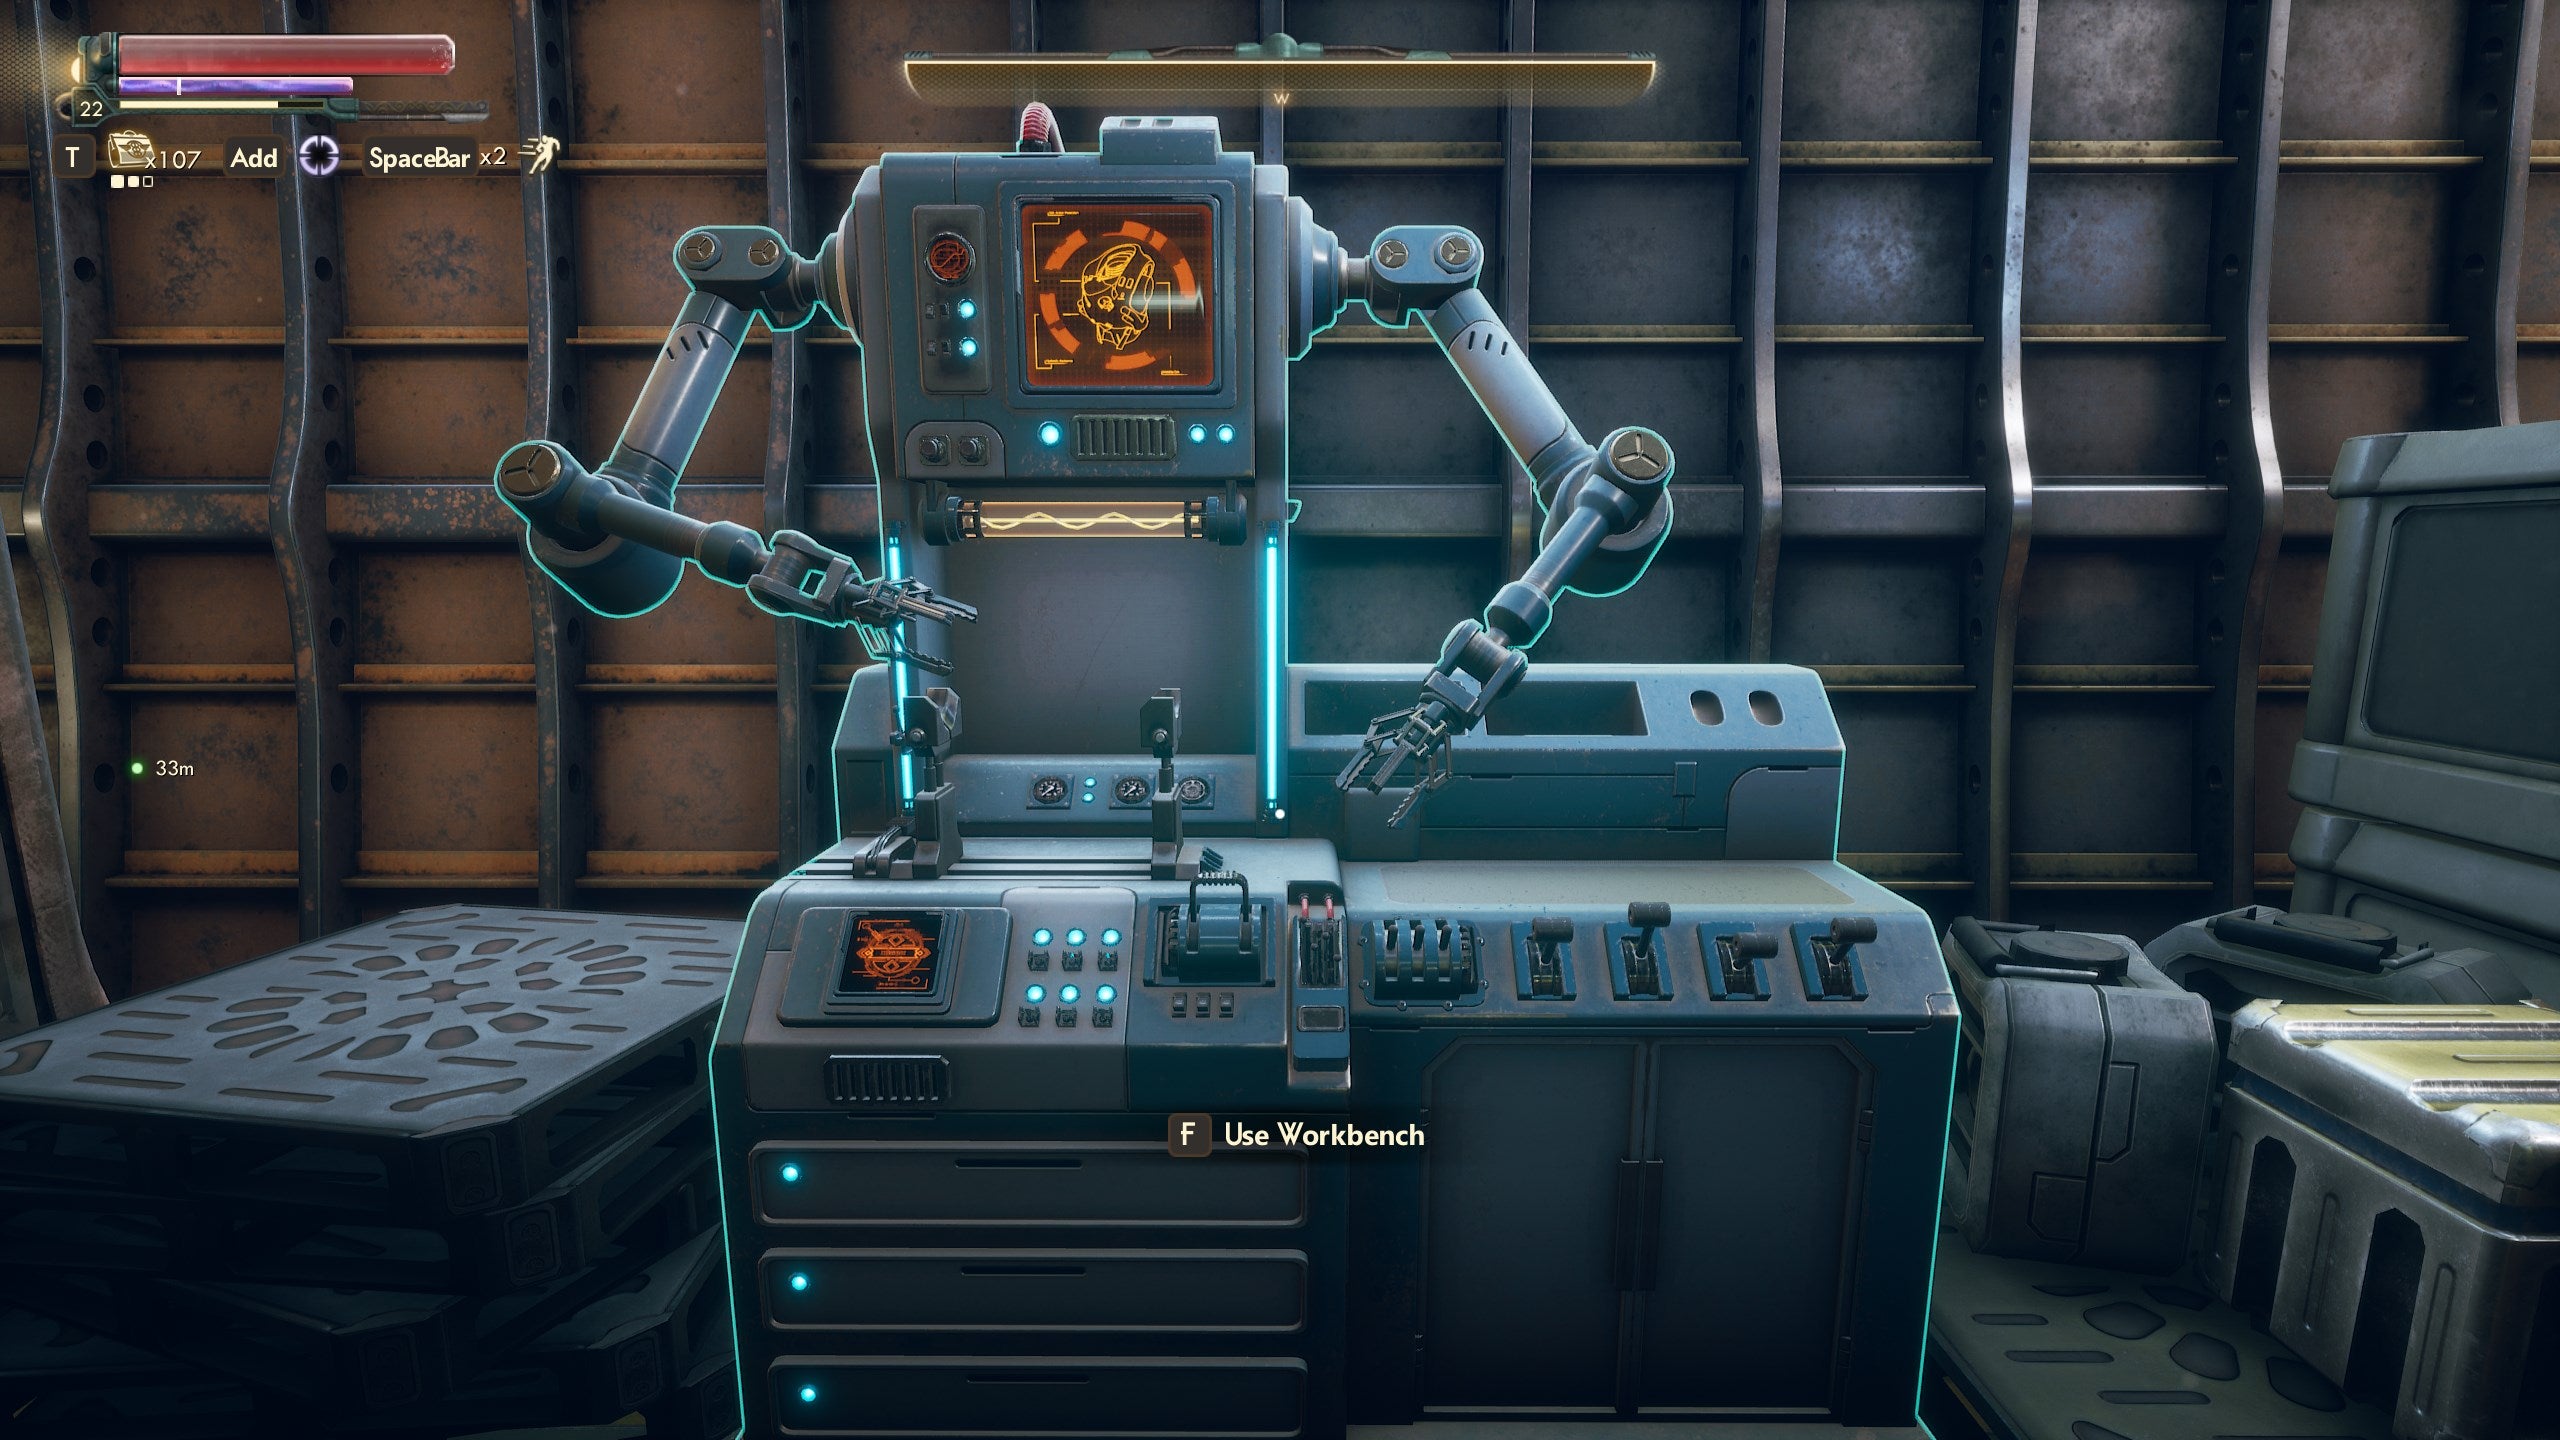 Image for The Outer Worlds mods & Workbench guide - how to repair, tinker, install mods, and use the Workbench